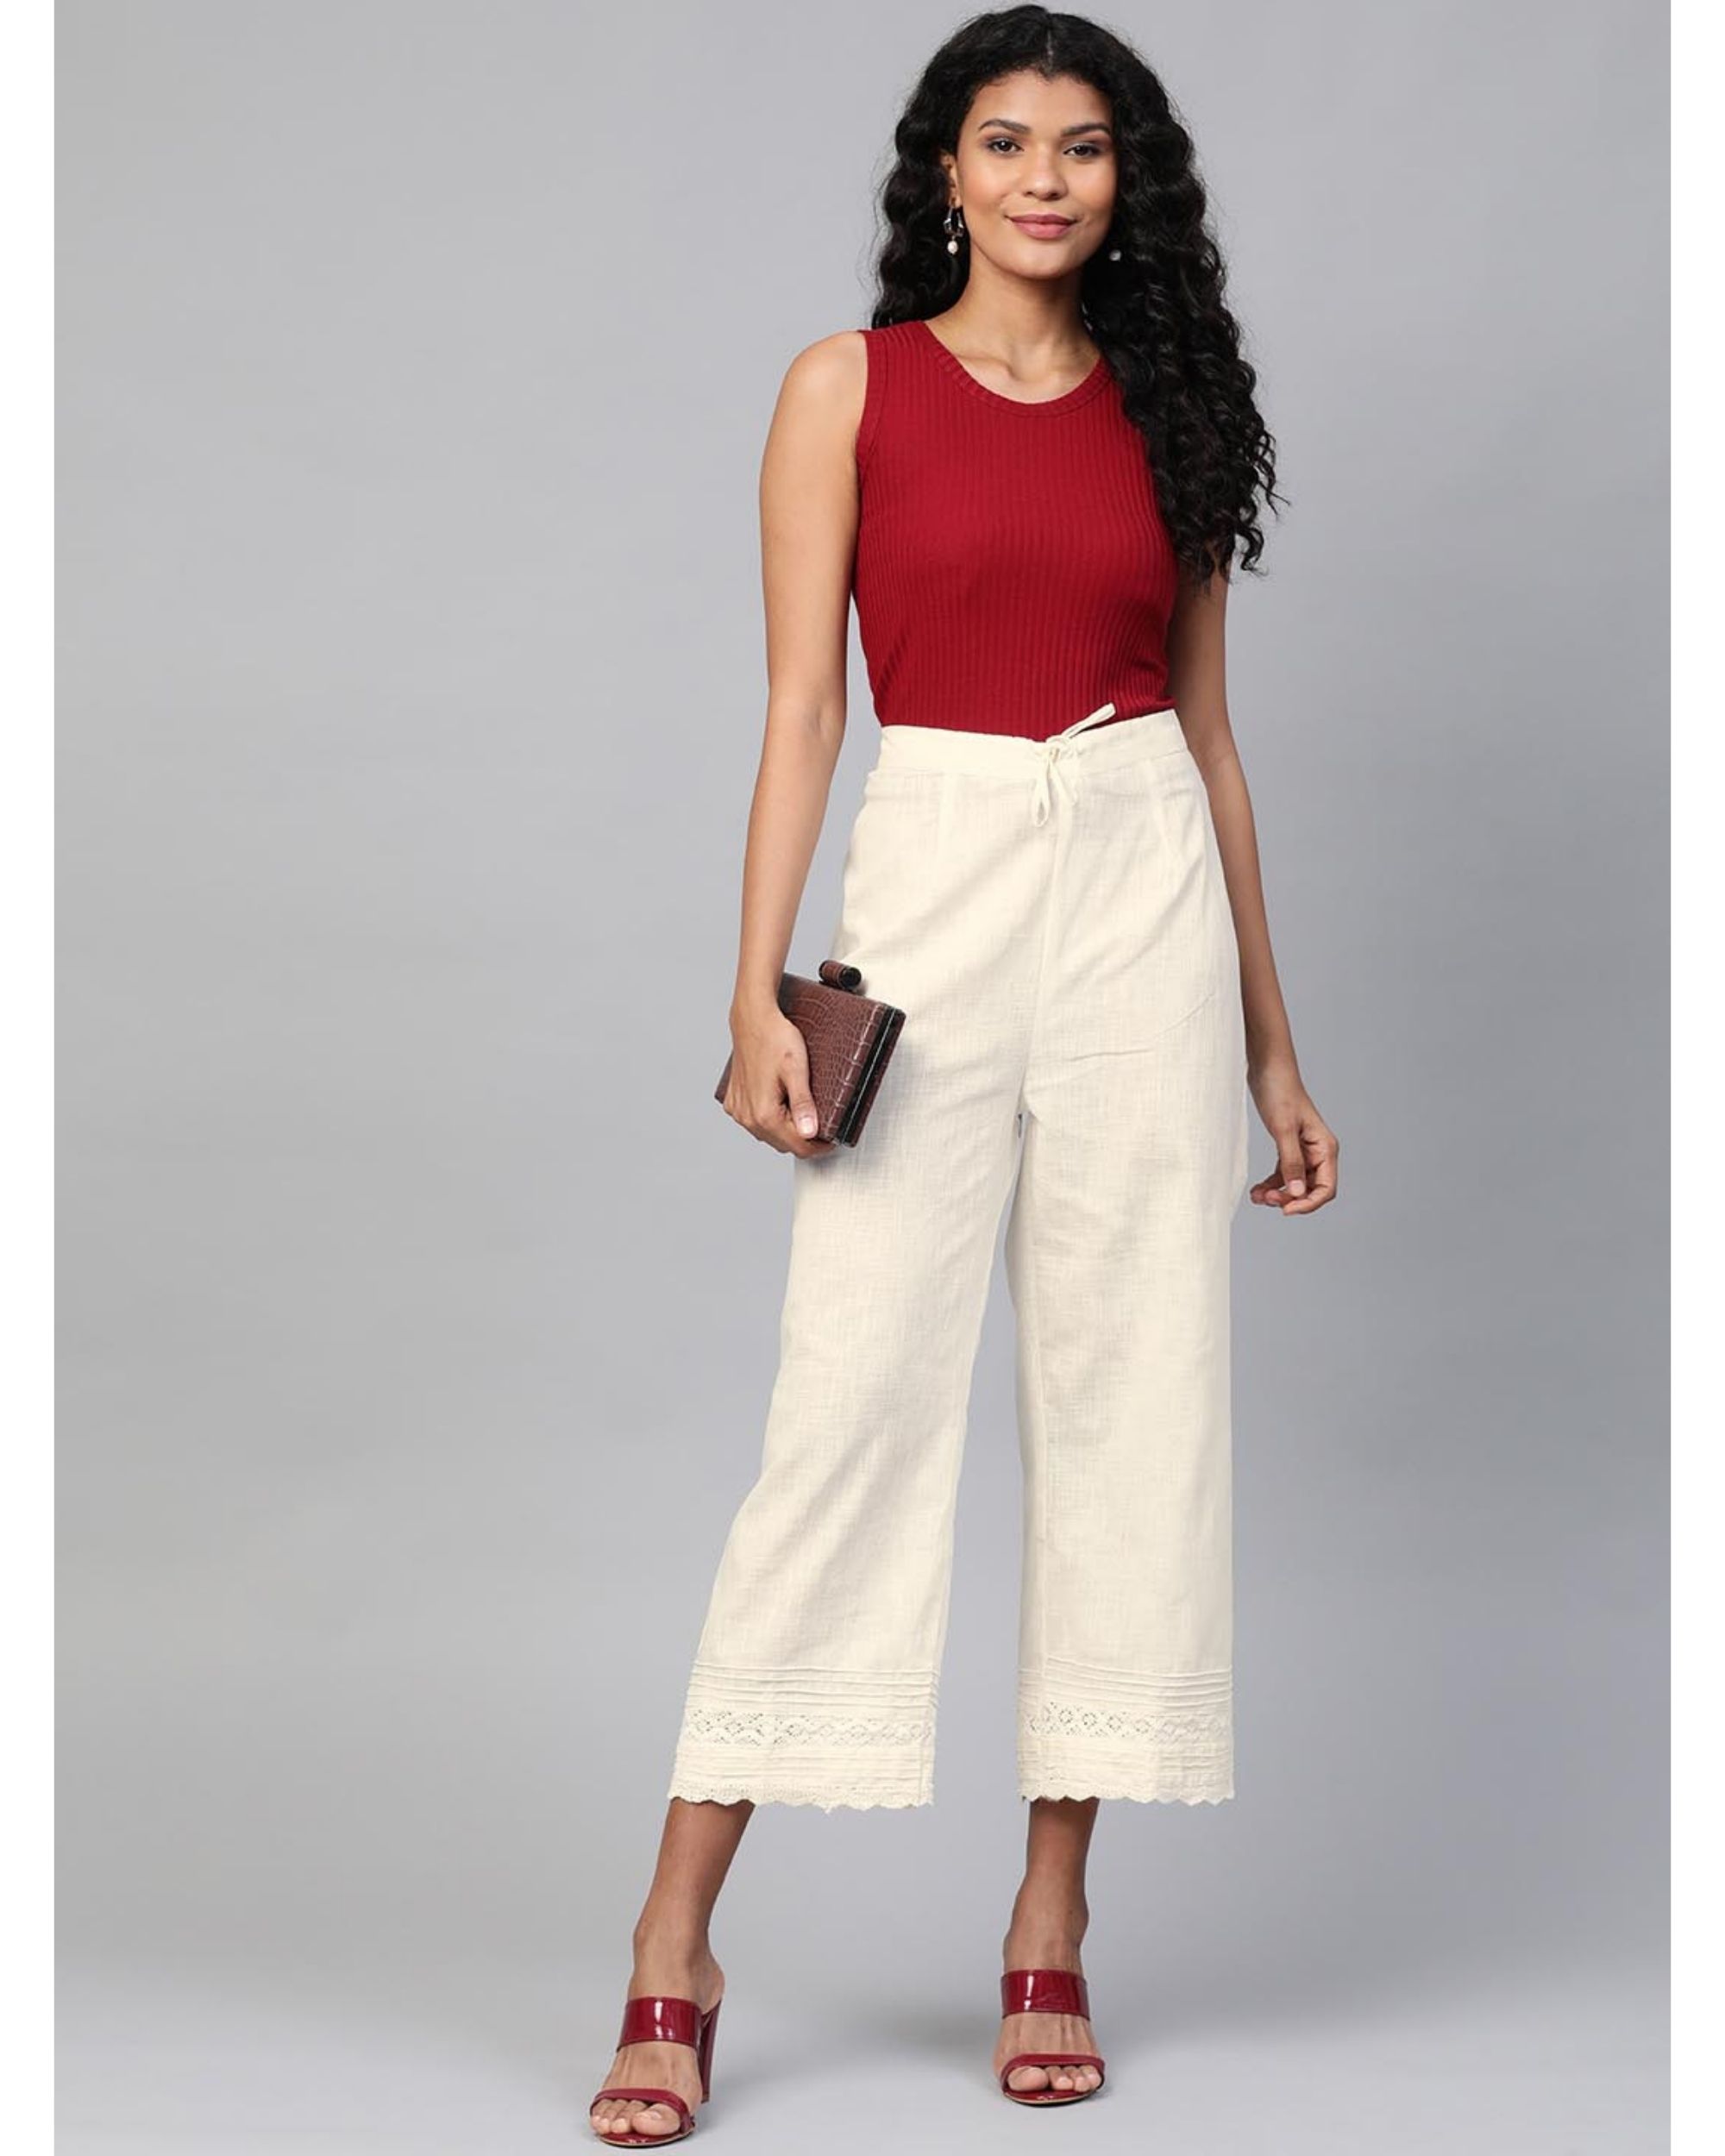 Discover more than 78 white lace palazzo pants latest - in.eteachers